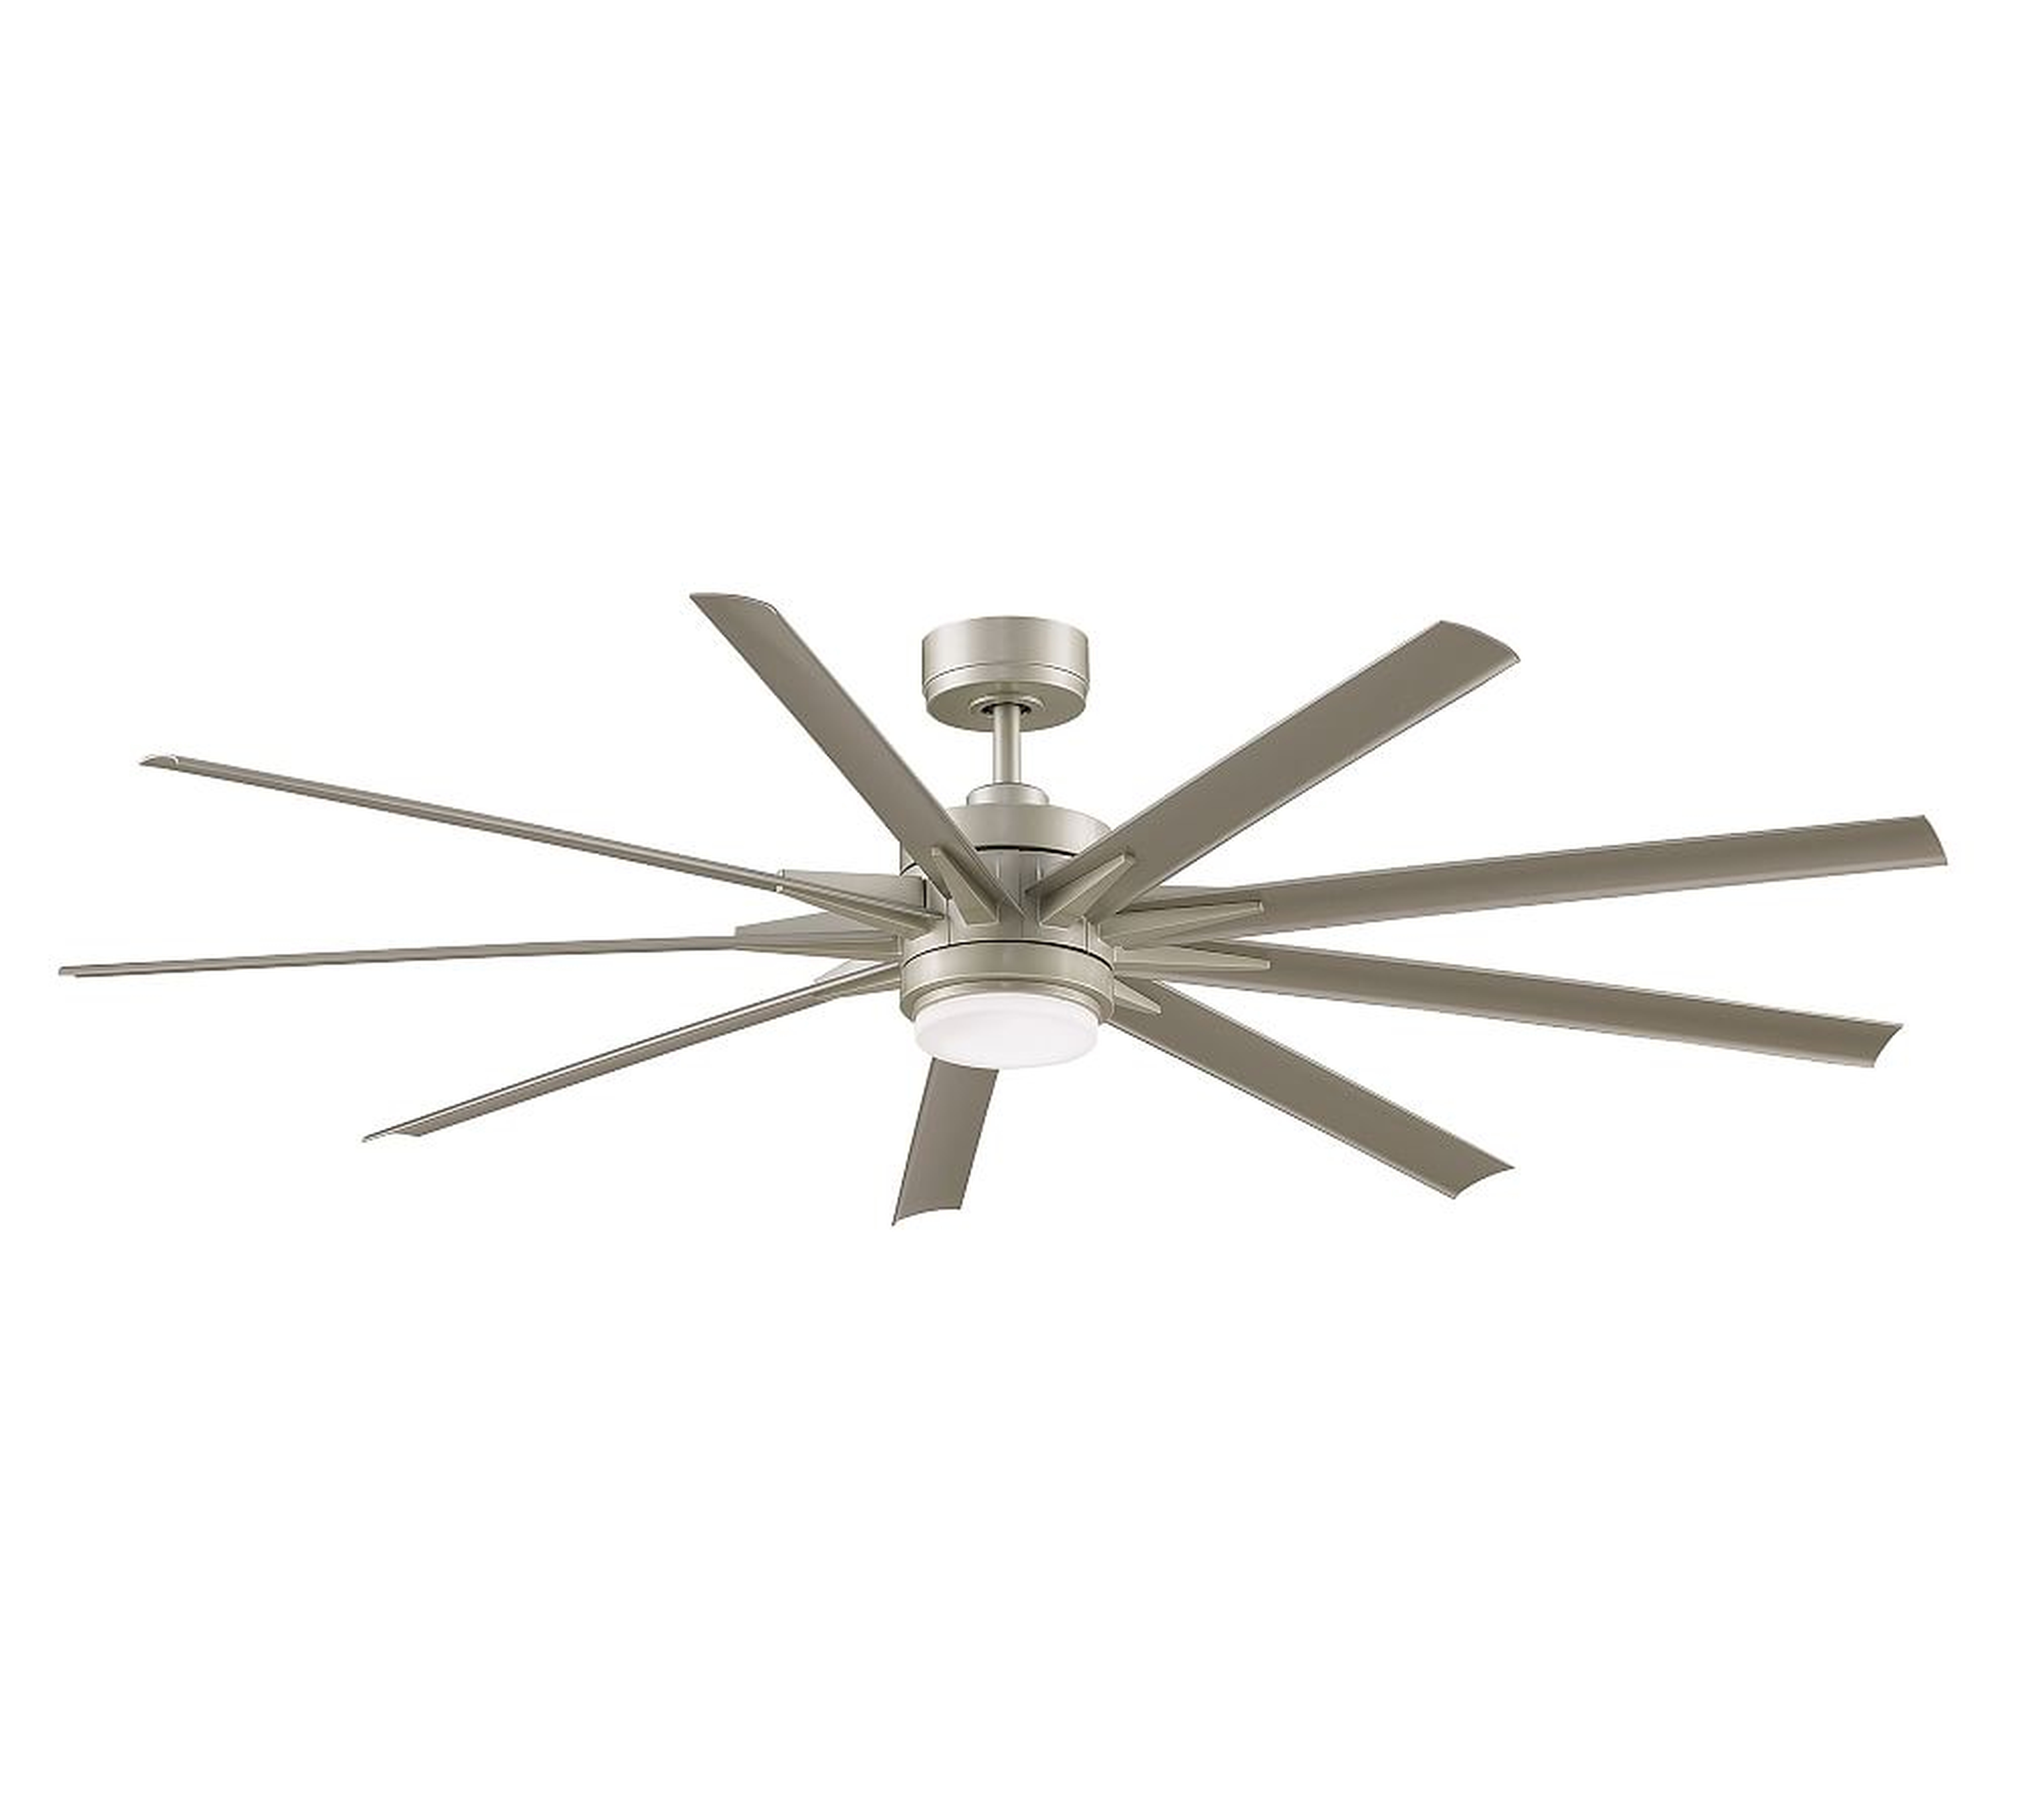 Odyn 72" Ceiling Fan Brushed Nickel with Brushed Nickel Blades - Pottery Barn